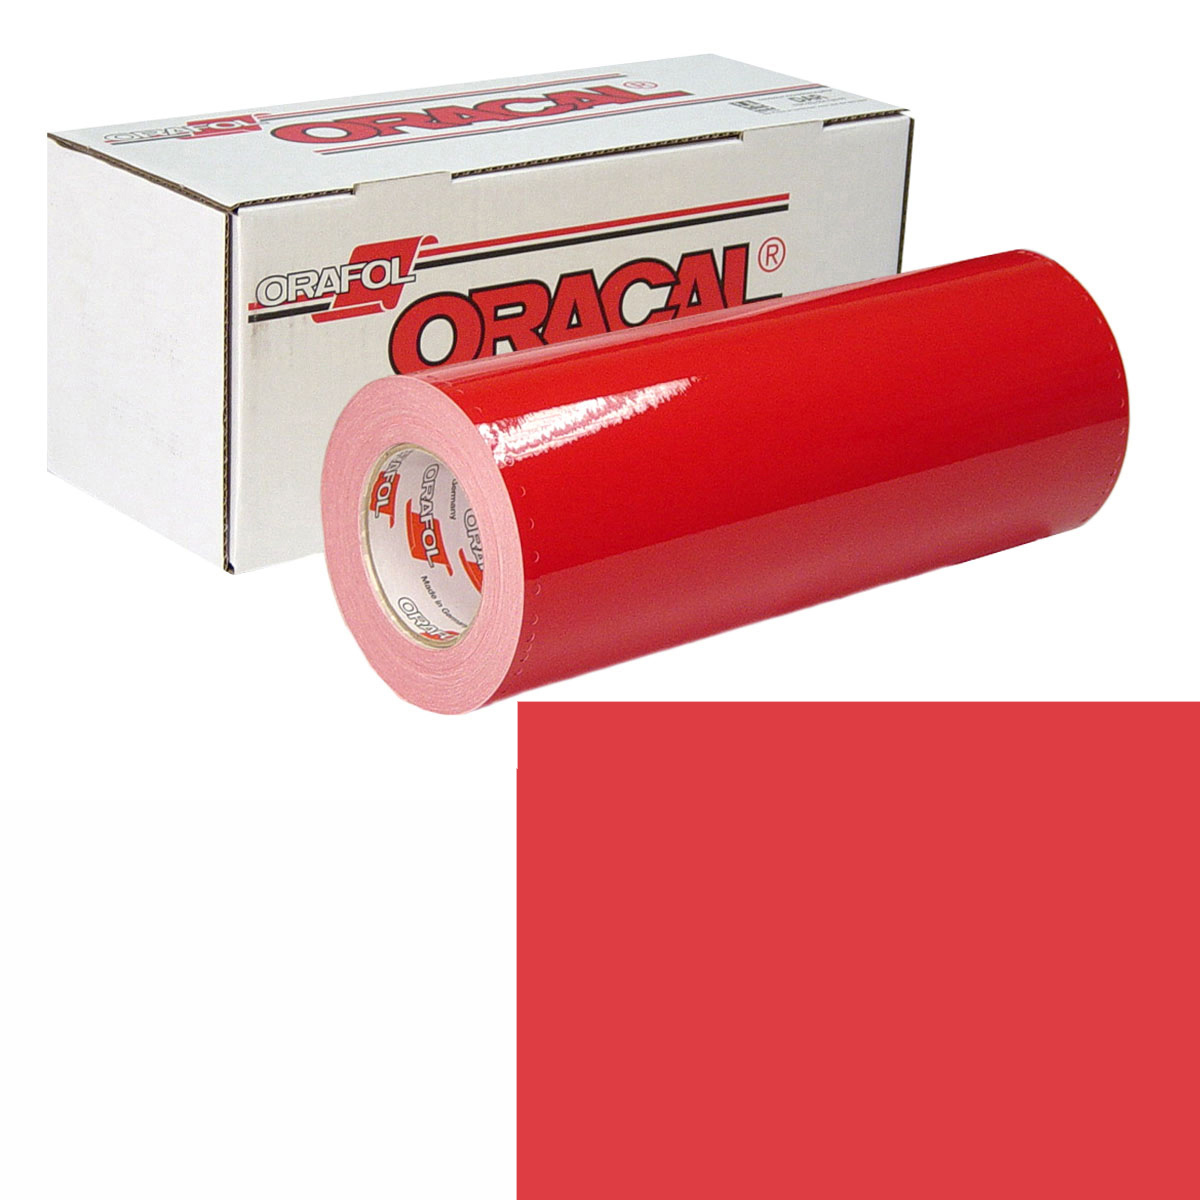 ORACAL 951 30in X 10yd 347 Red Coral